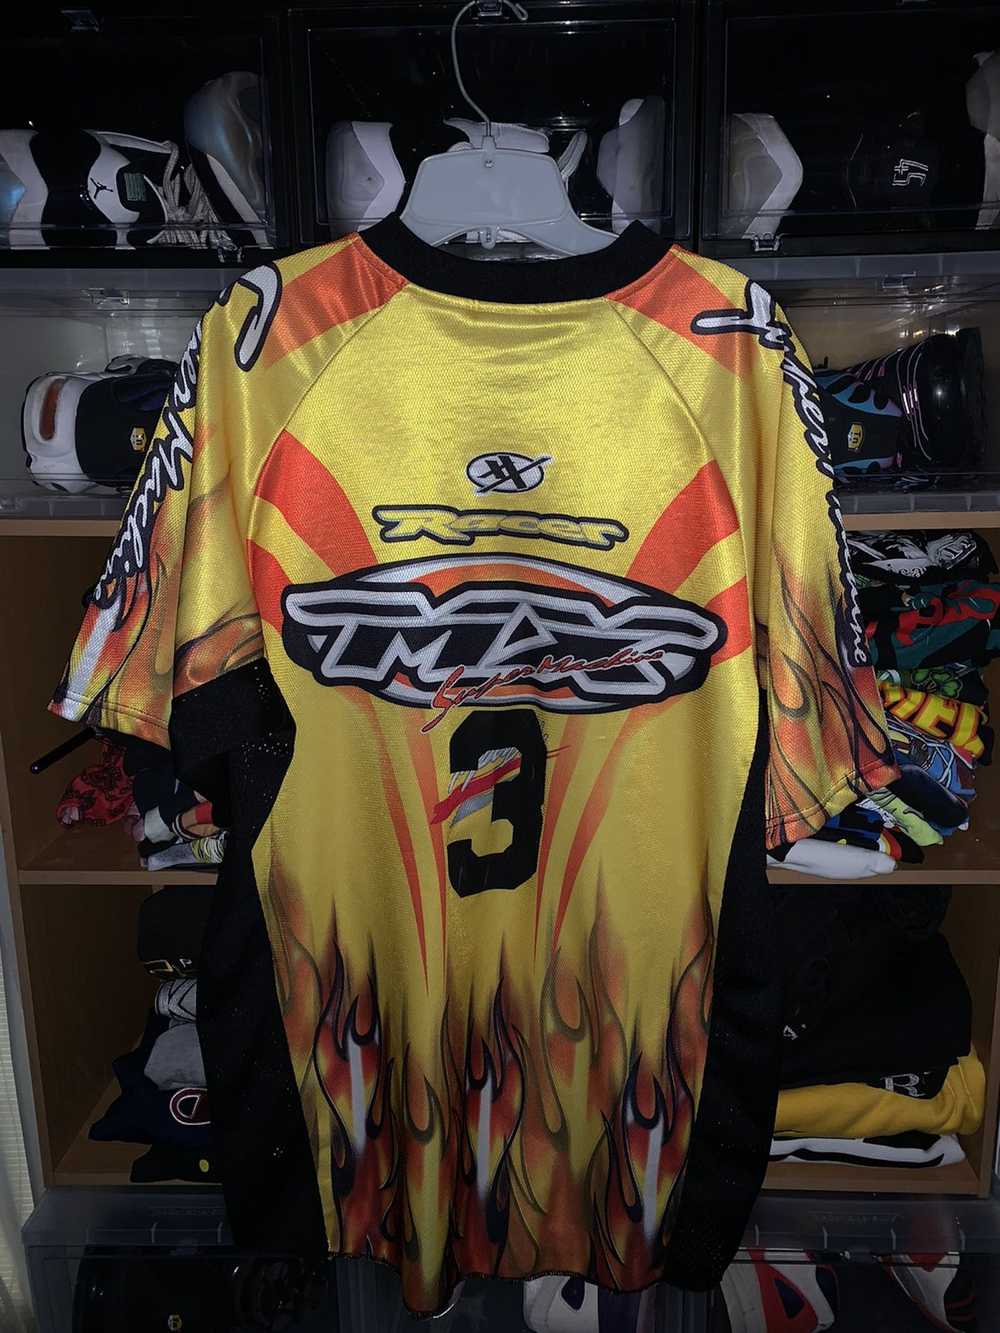 Athletic Works Fire Yellow Racing Jersey 🔥 - image 2